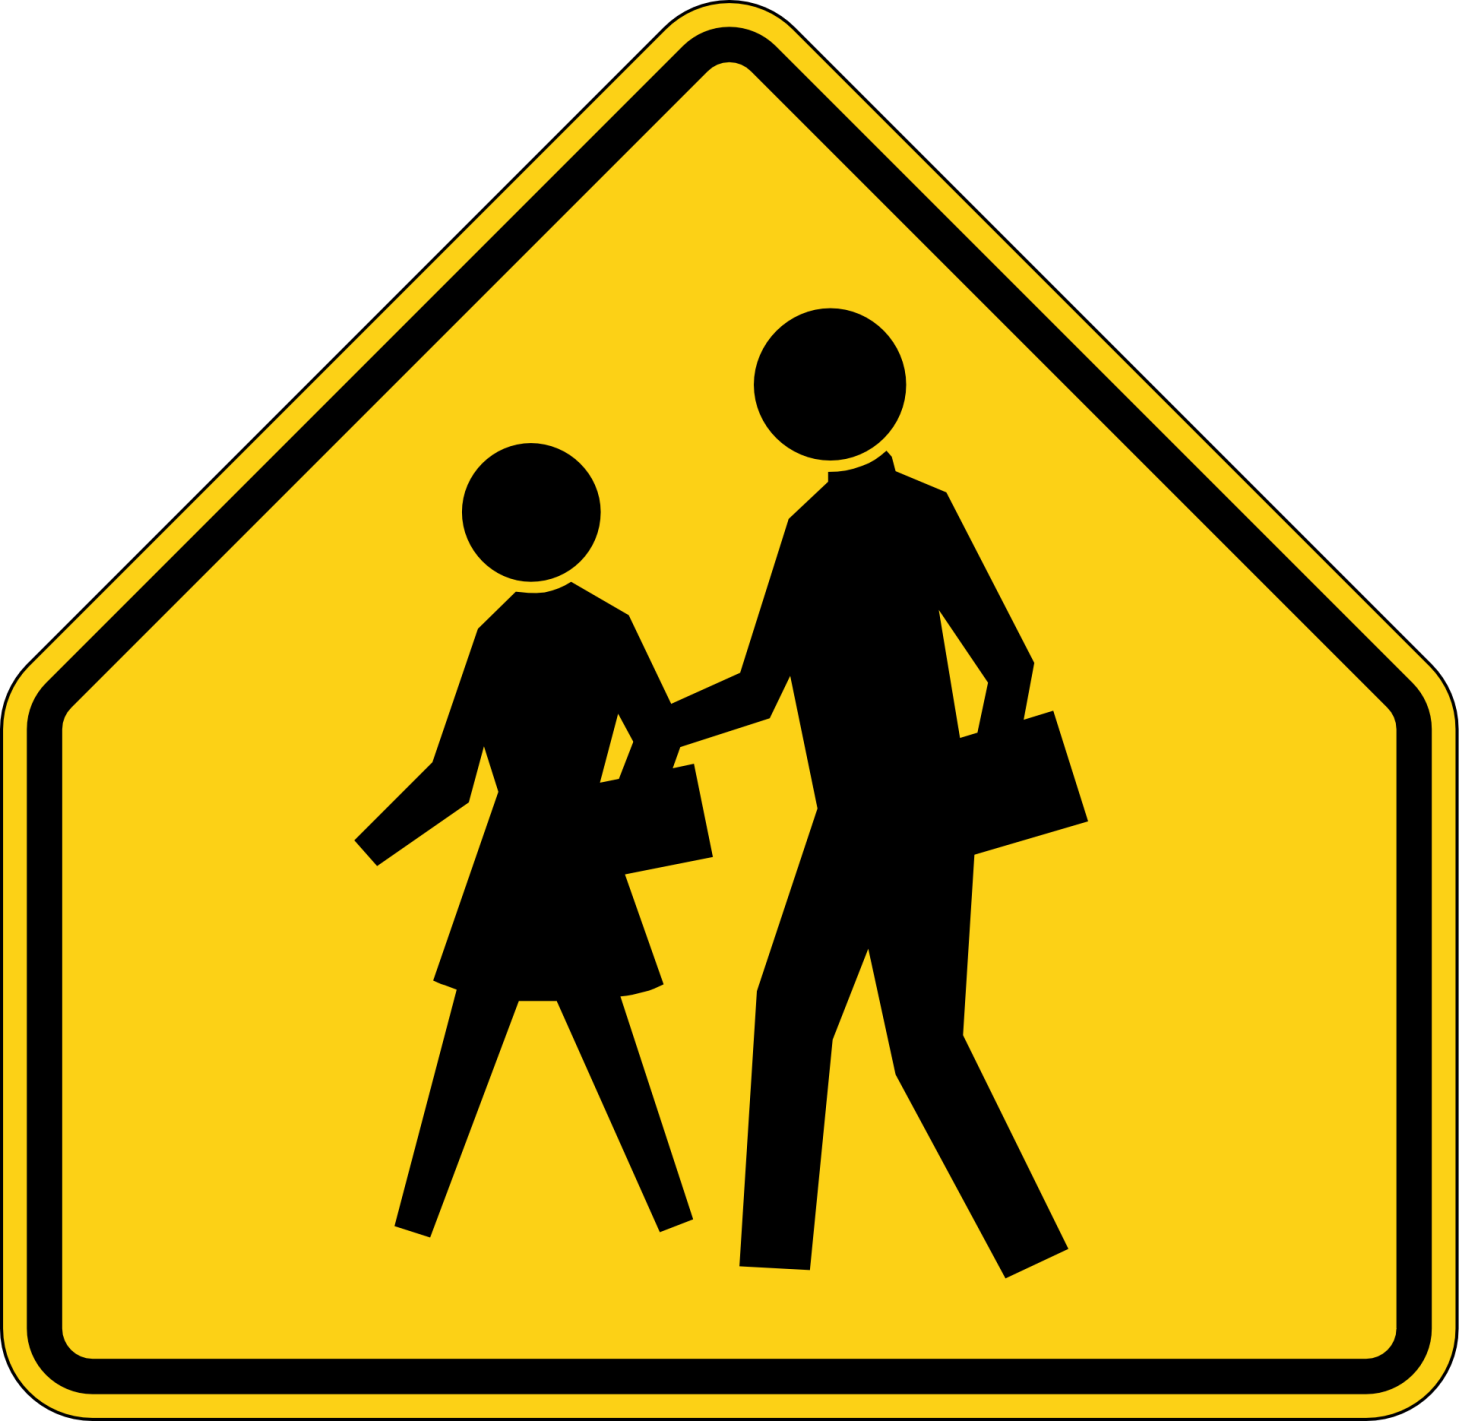 This Sign Means You Are Near A School - School Zone Sign (1459x1421)